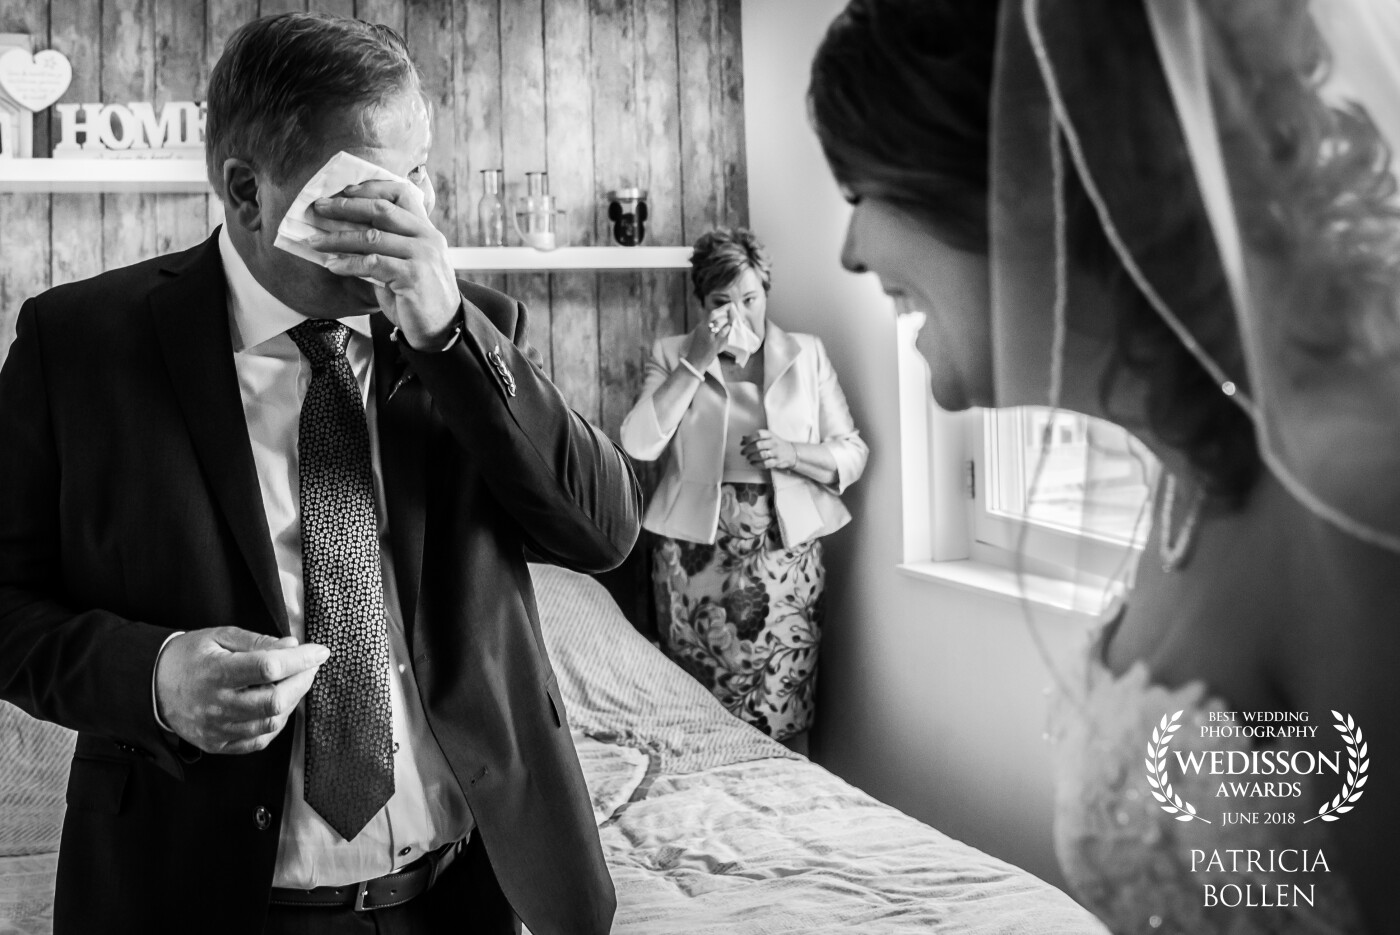 Mother cried from the moment her girl was dressed. When we gave the father a first look :-) he also start crying. The bride couldn't stop laughing. <br />
I love to catch this emotions.